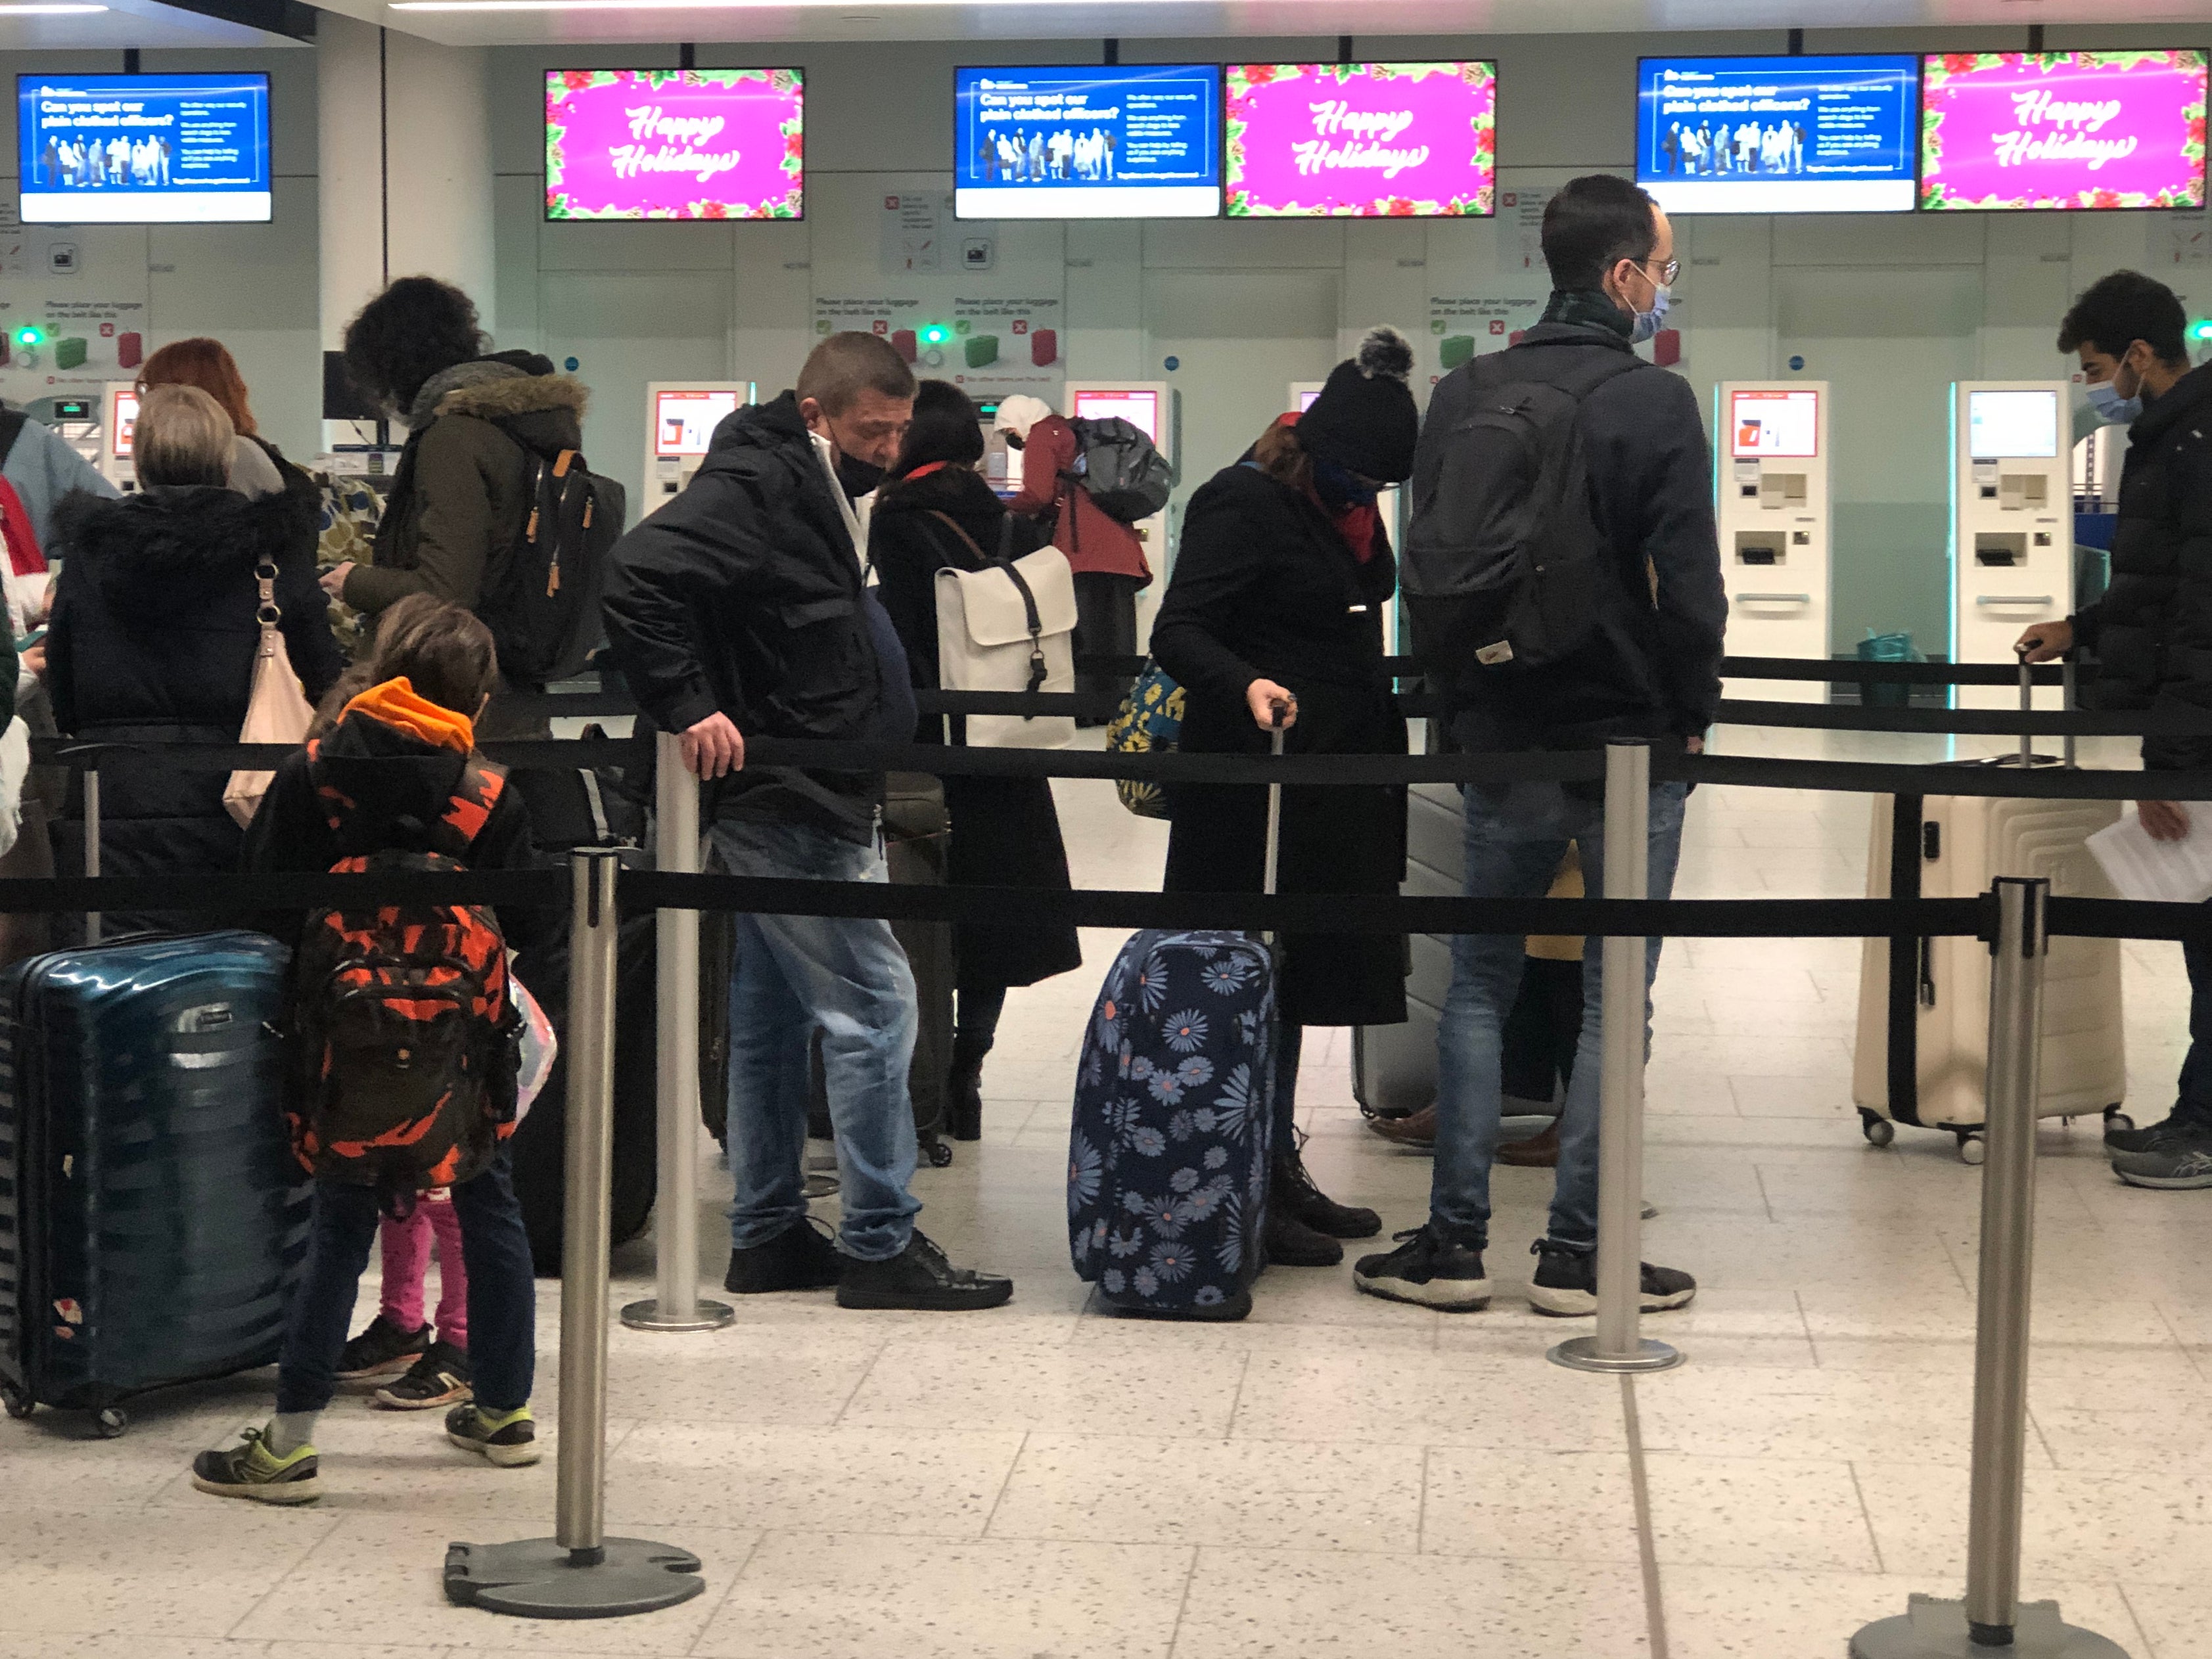 Long haul: passengers in the check-in queue at Gatwick airport